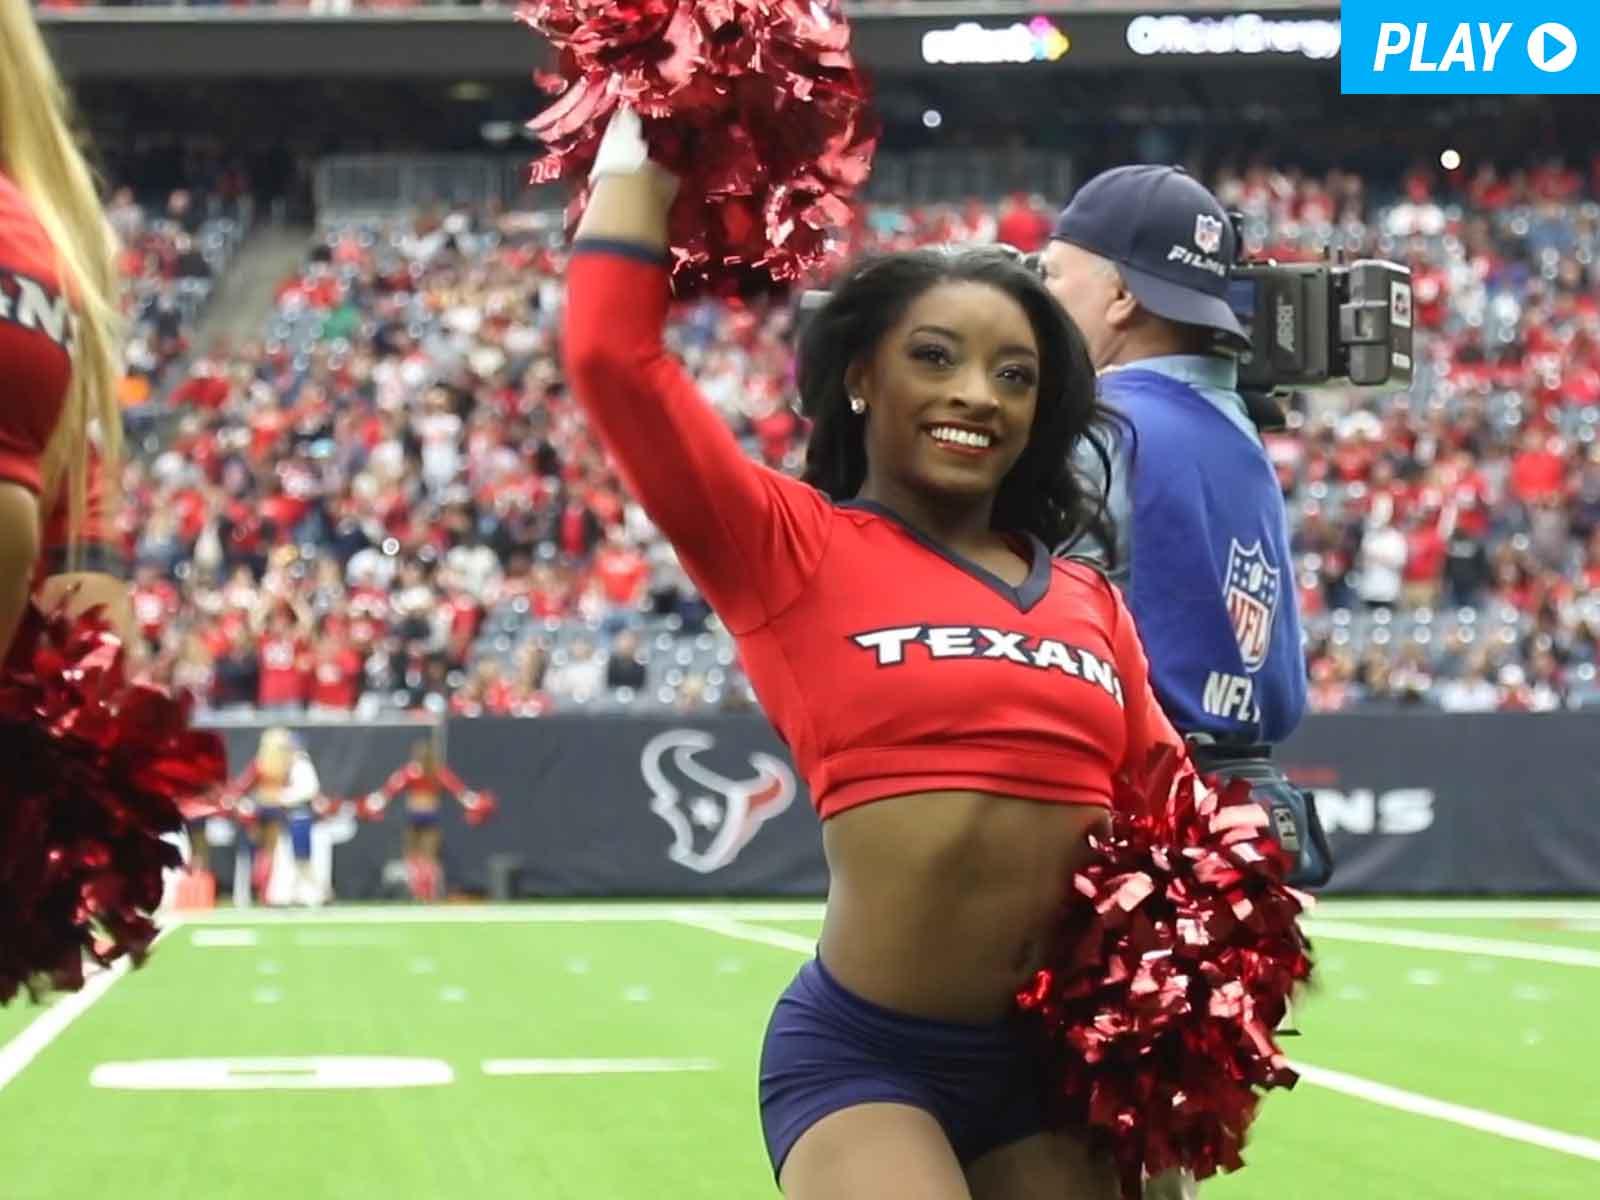 Simone Biles Is Full of Spirit as Houston Texans Cheerleader, How ‘Bout You?!